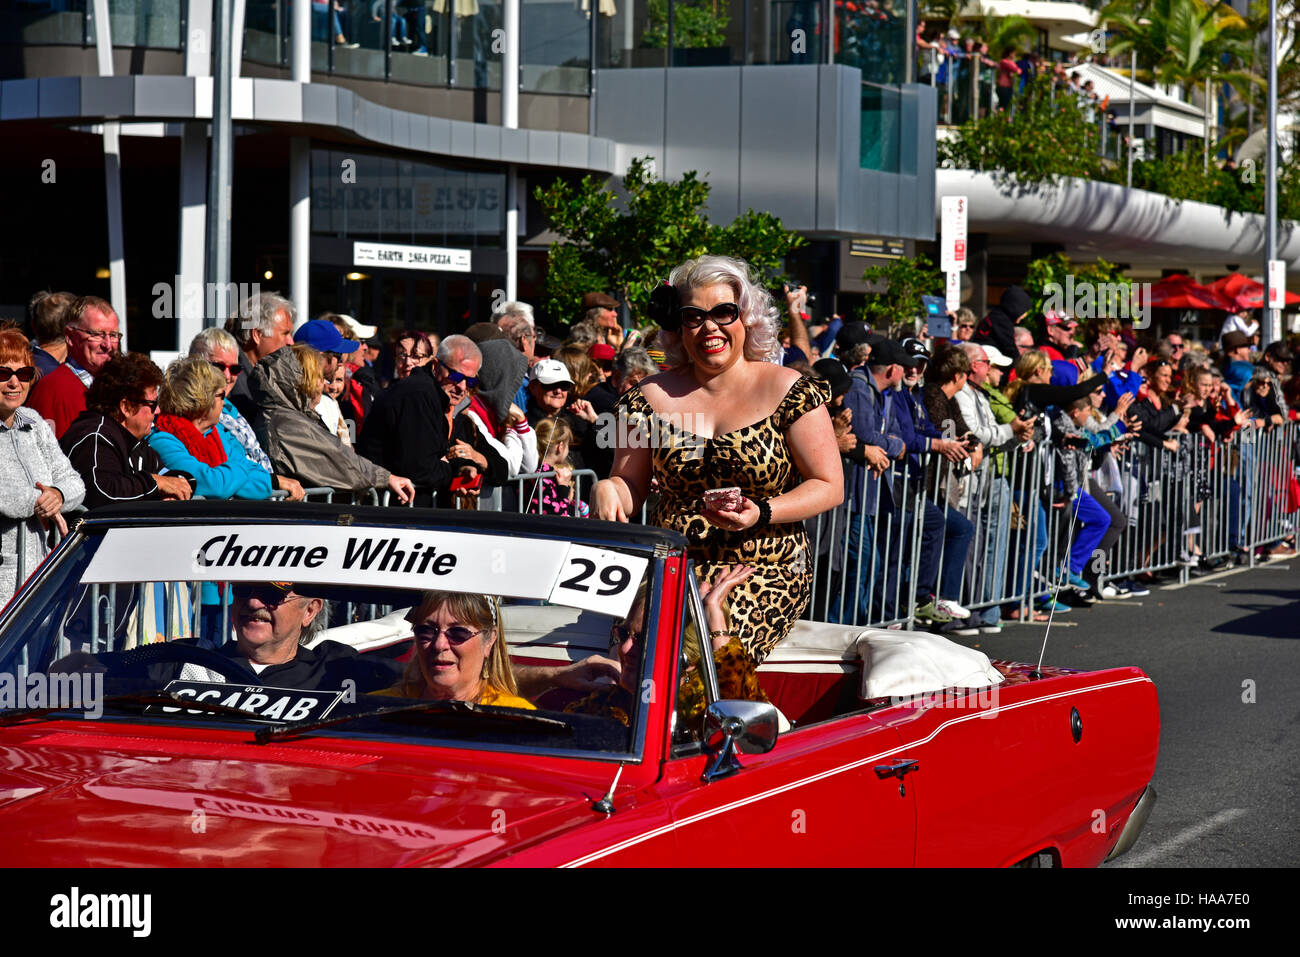 big brother celebrity Charne White Louise at the Cooly rocks on retro festival street parade in coolangatta on the gold coast Stock Photo